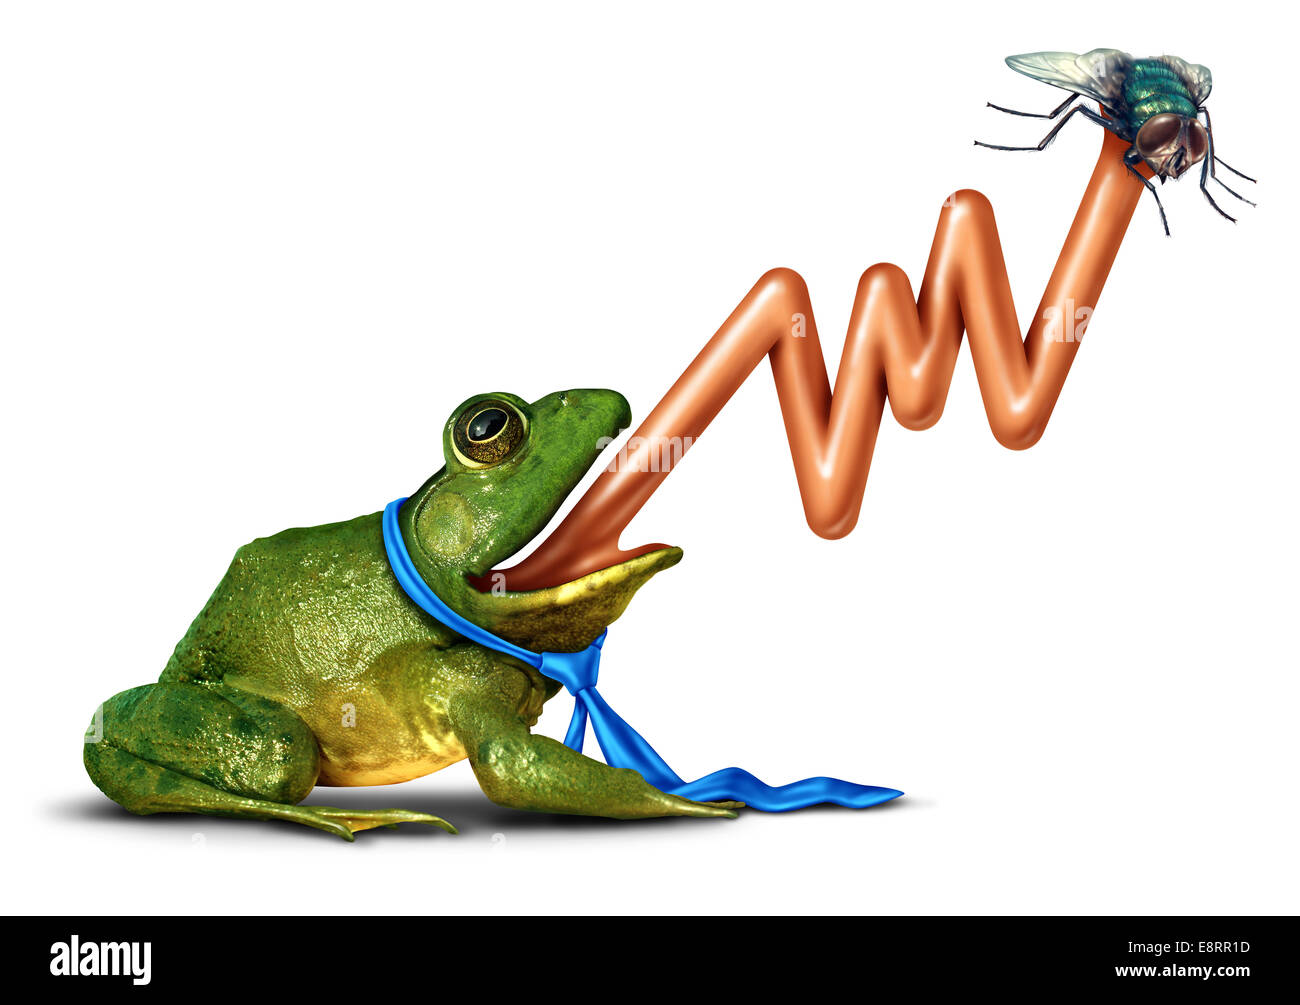 Business target and hitting the mark strategy concept as an anthropomorphic frog wearing a blue tie with a tongue shaped as an upward stock market chart catching a bug as a financial success metaphor on a white background. Stock Photo